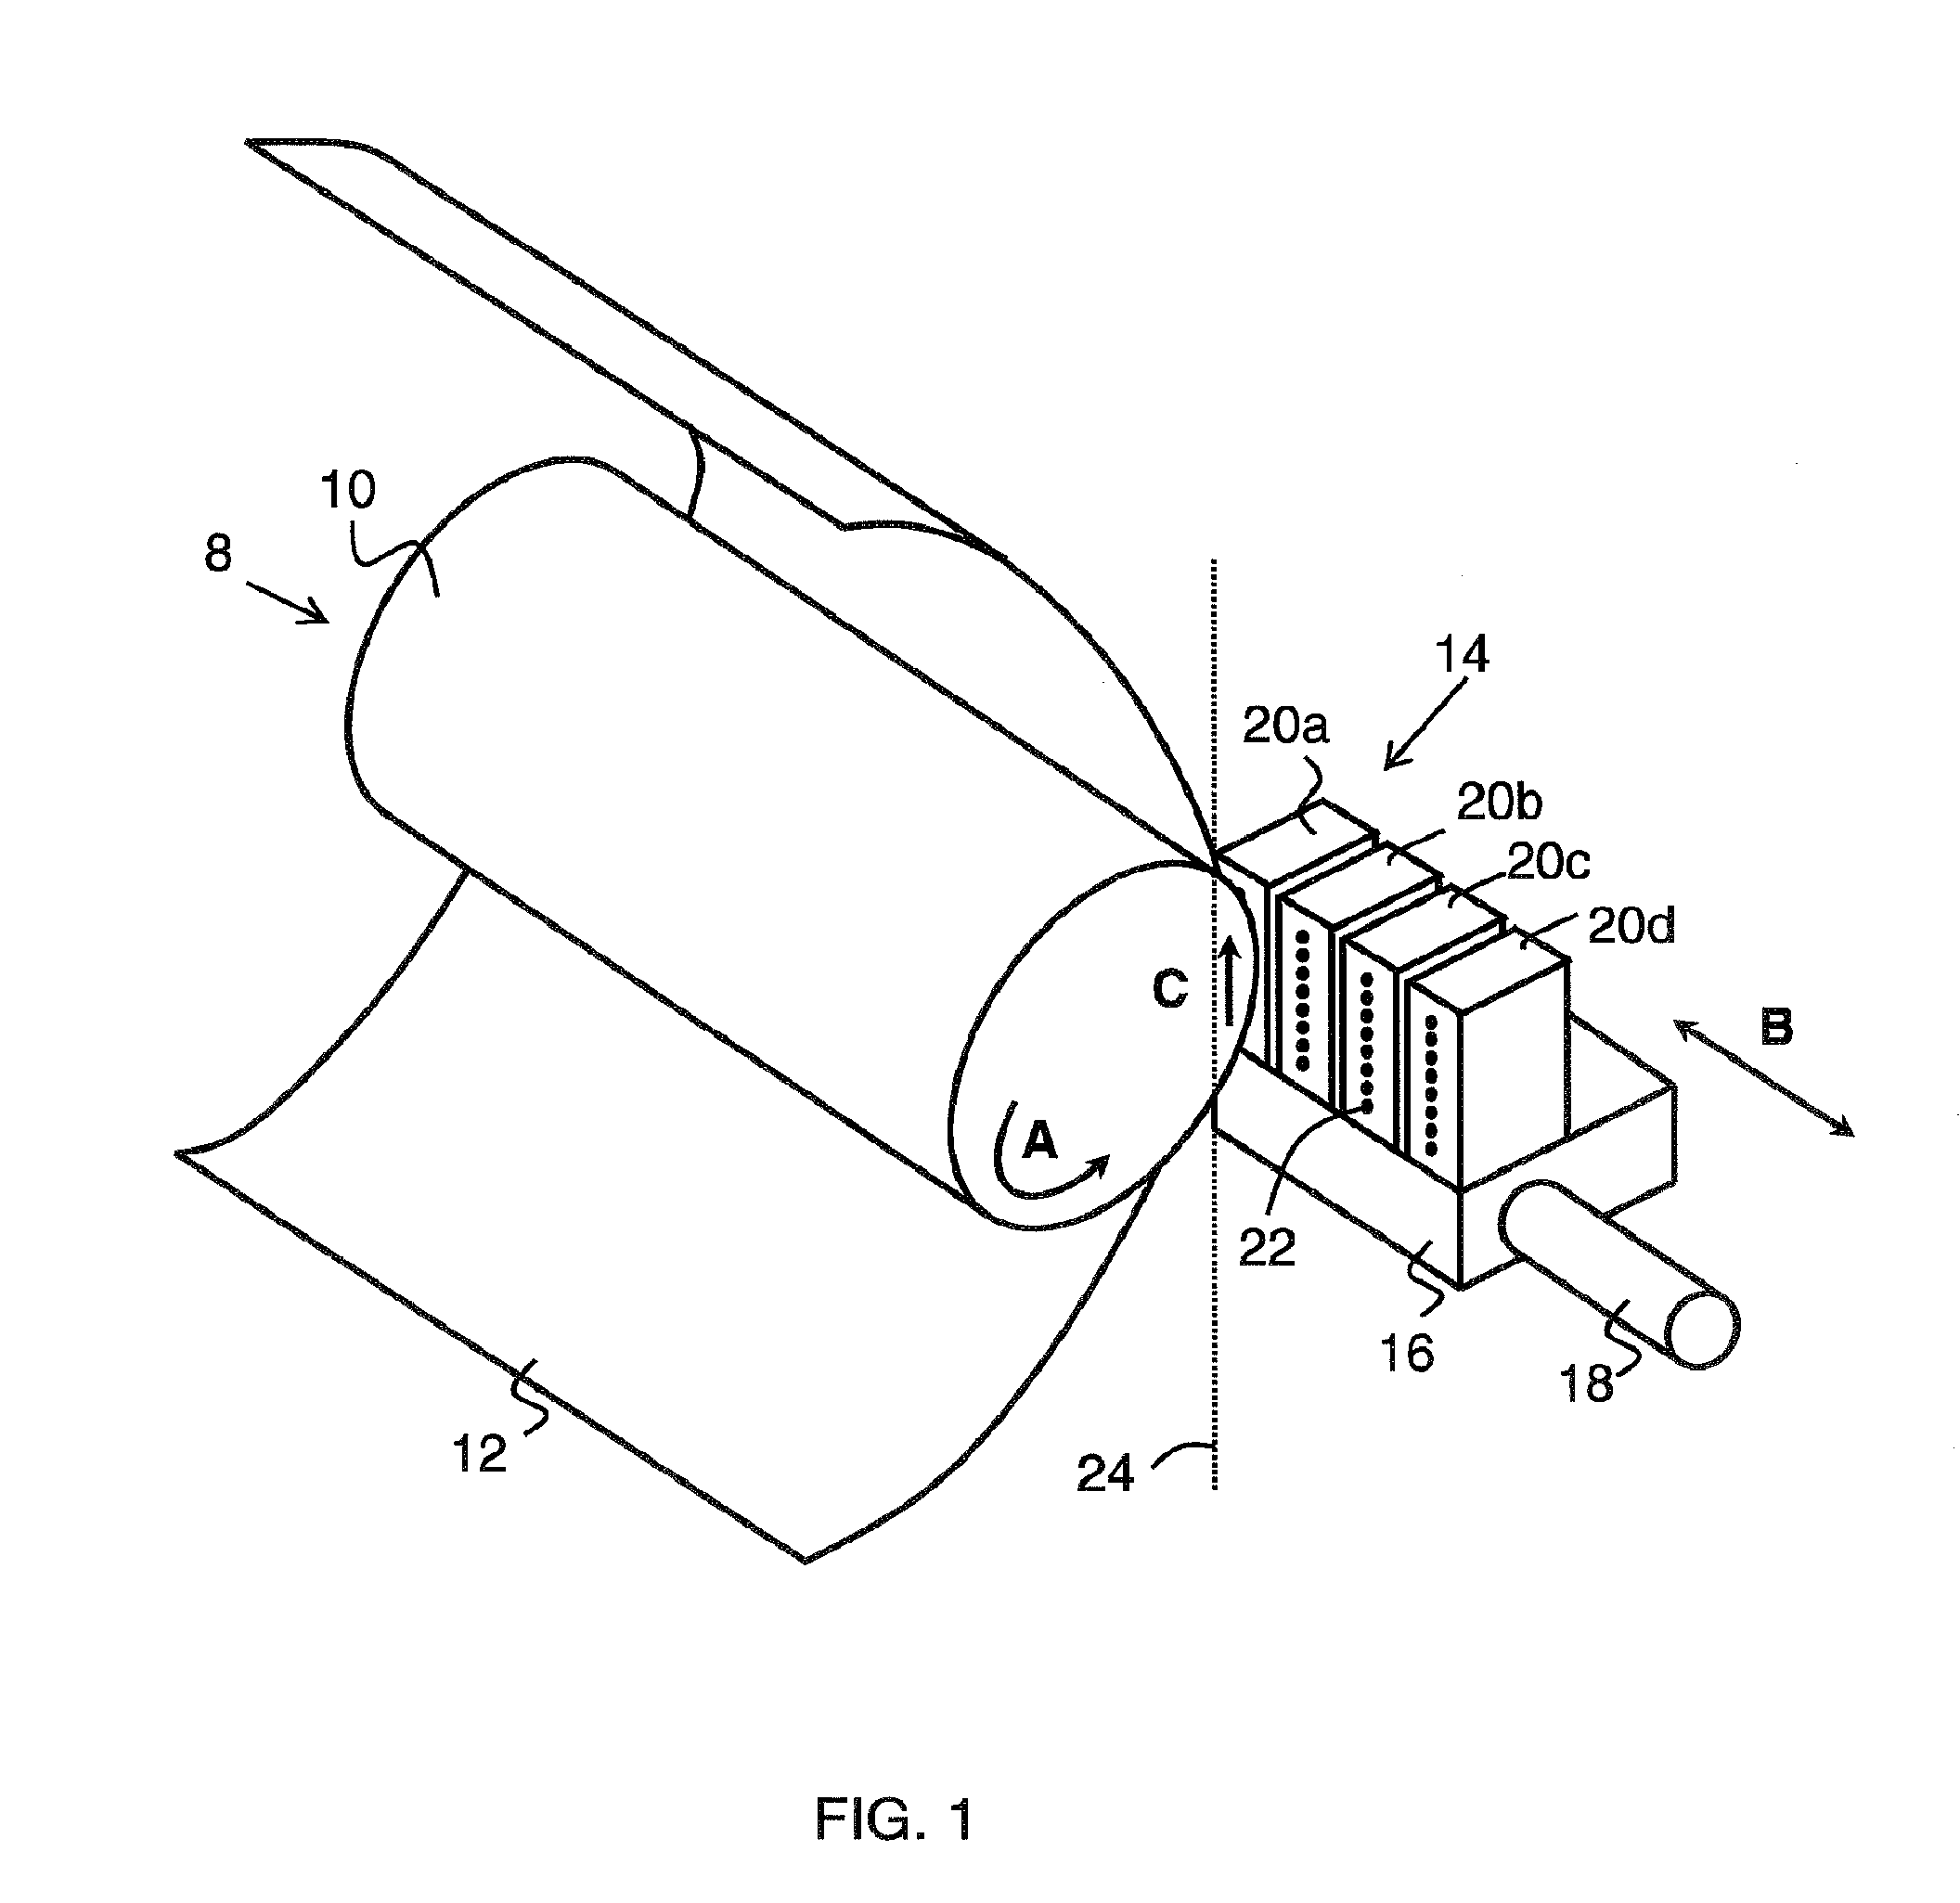 Swath printer and method for applying an ink image to a receiving medium using a swath printer